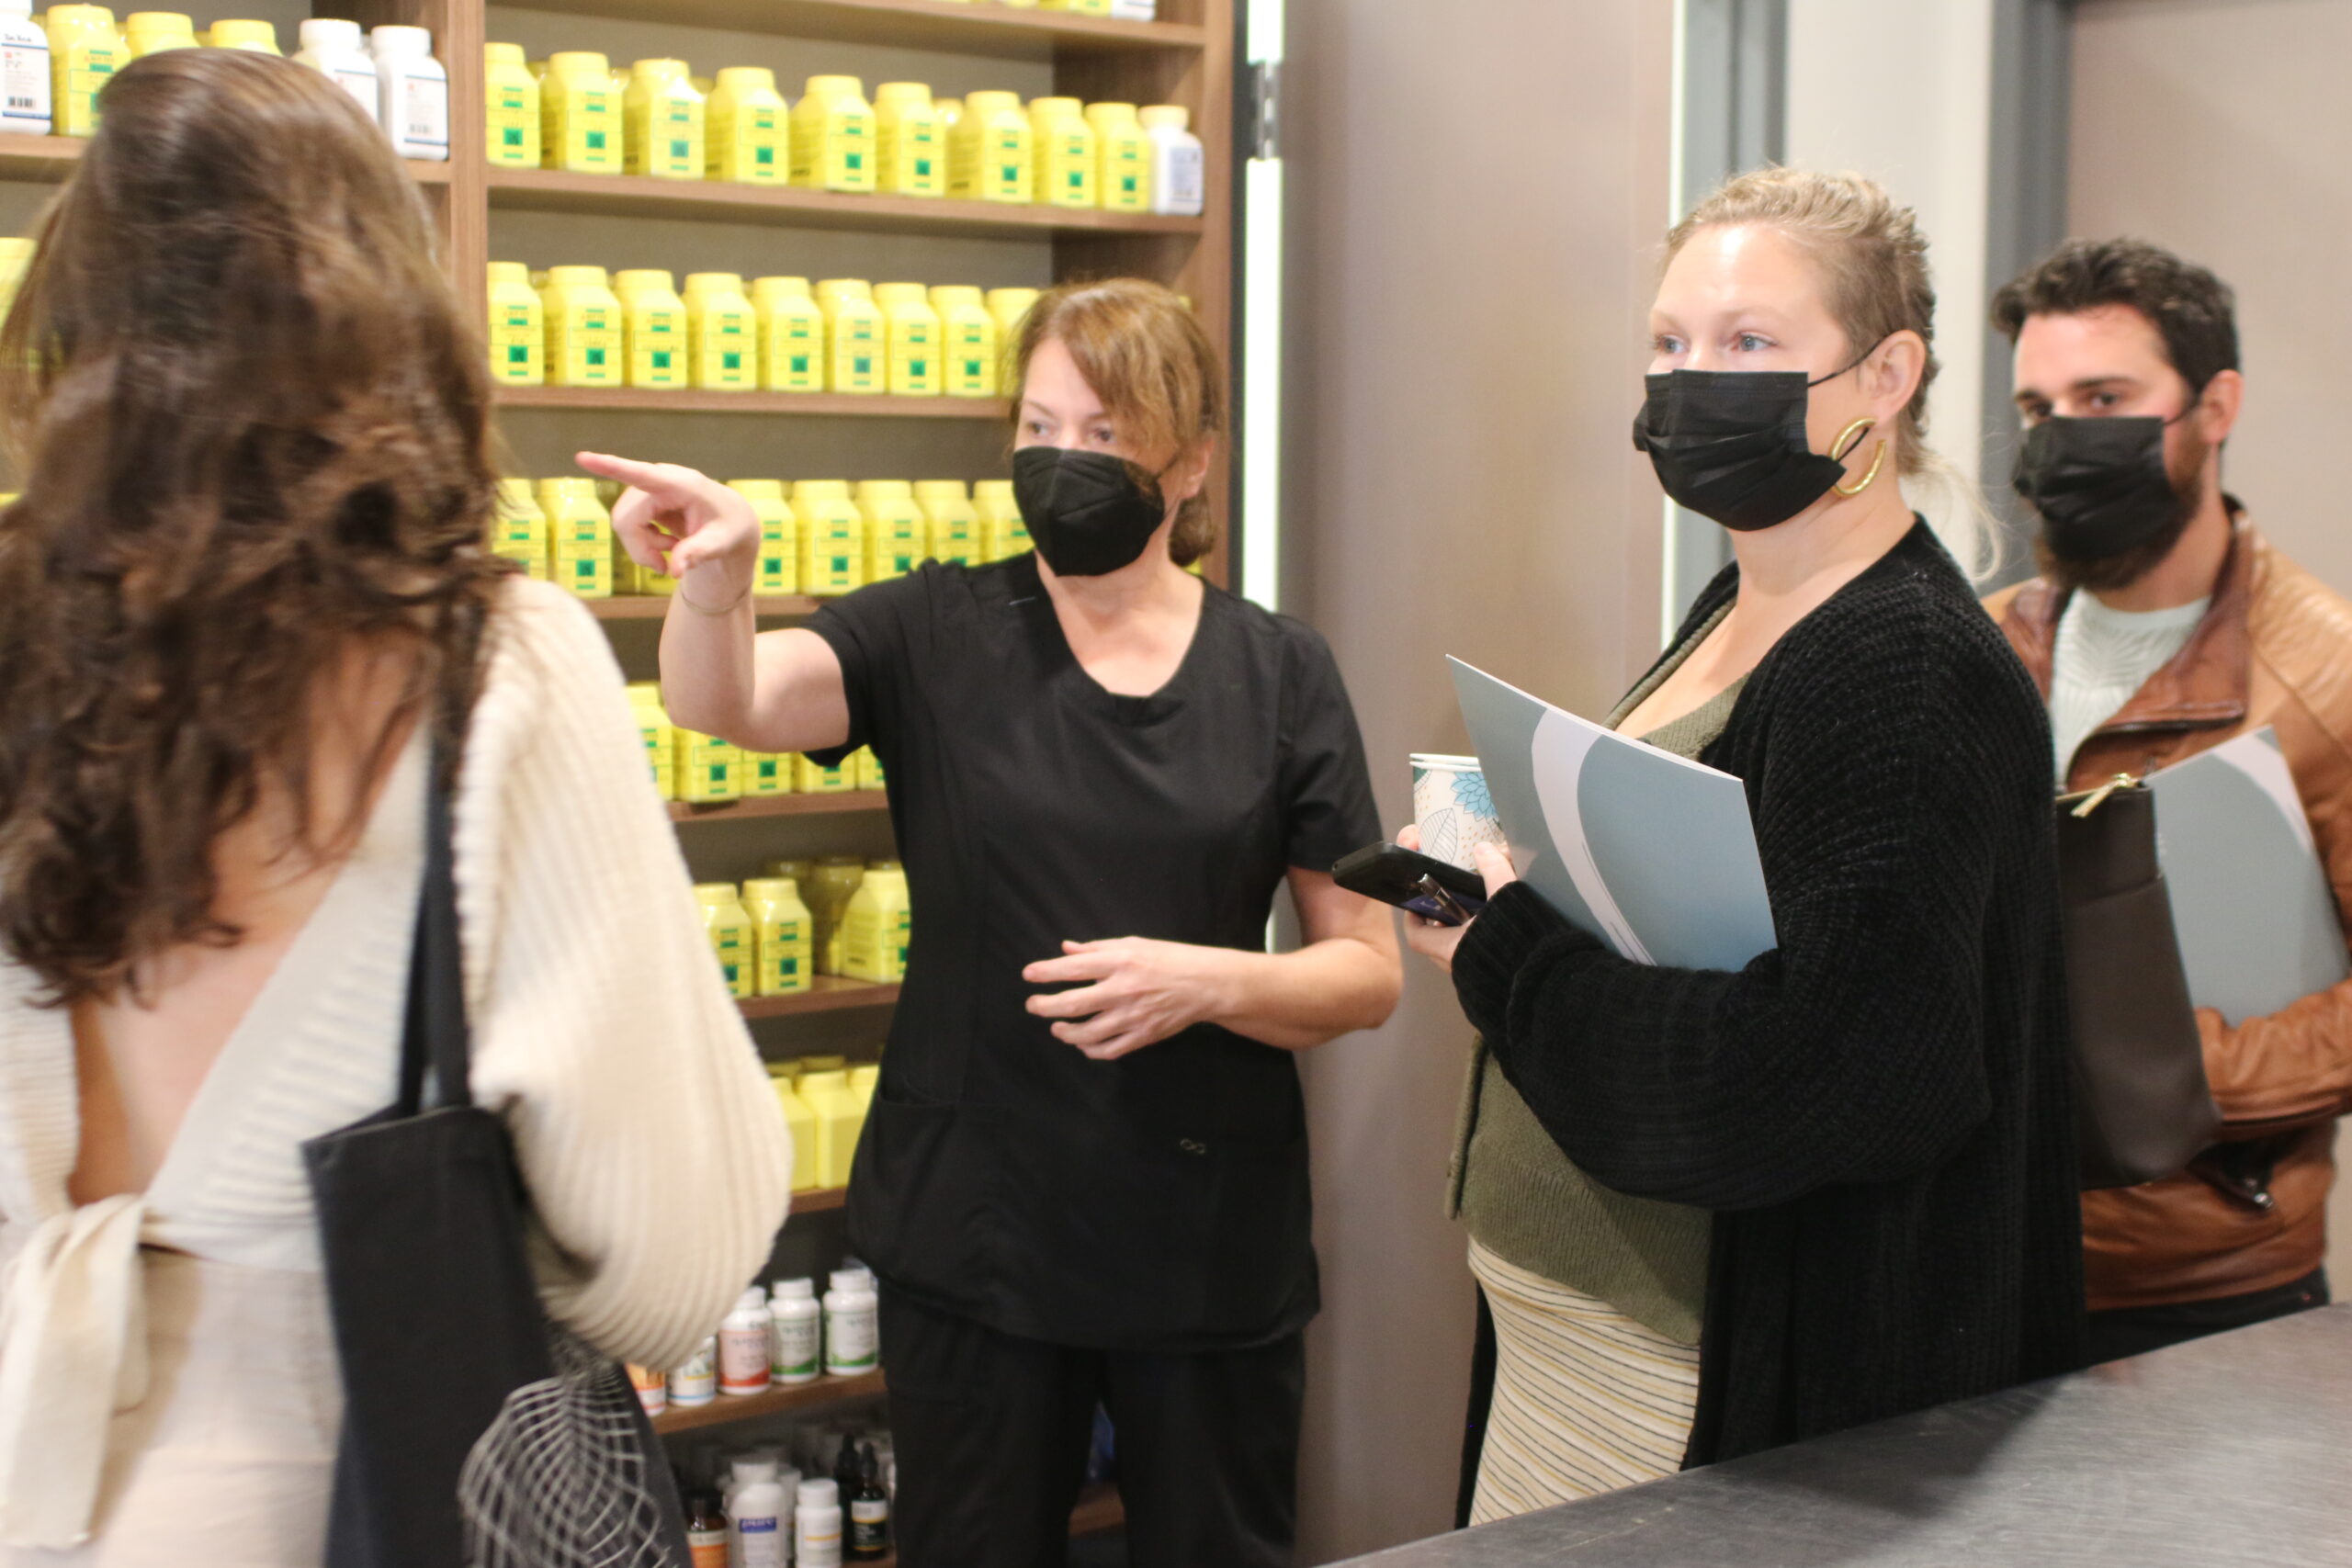 a woman wearing a black mask points to a shelf full of yellow bottles